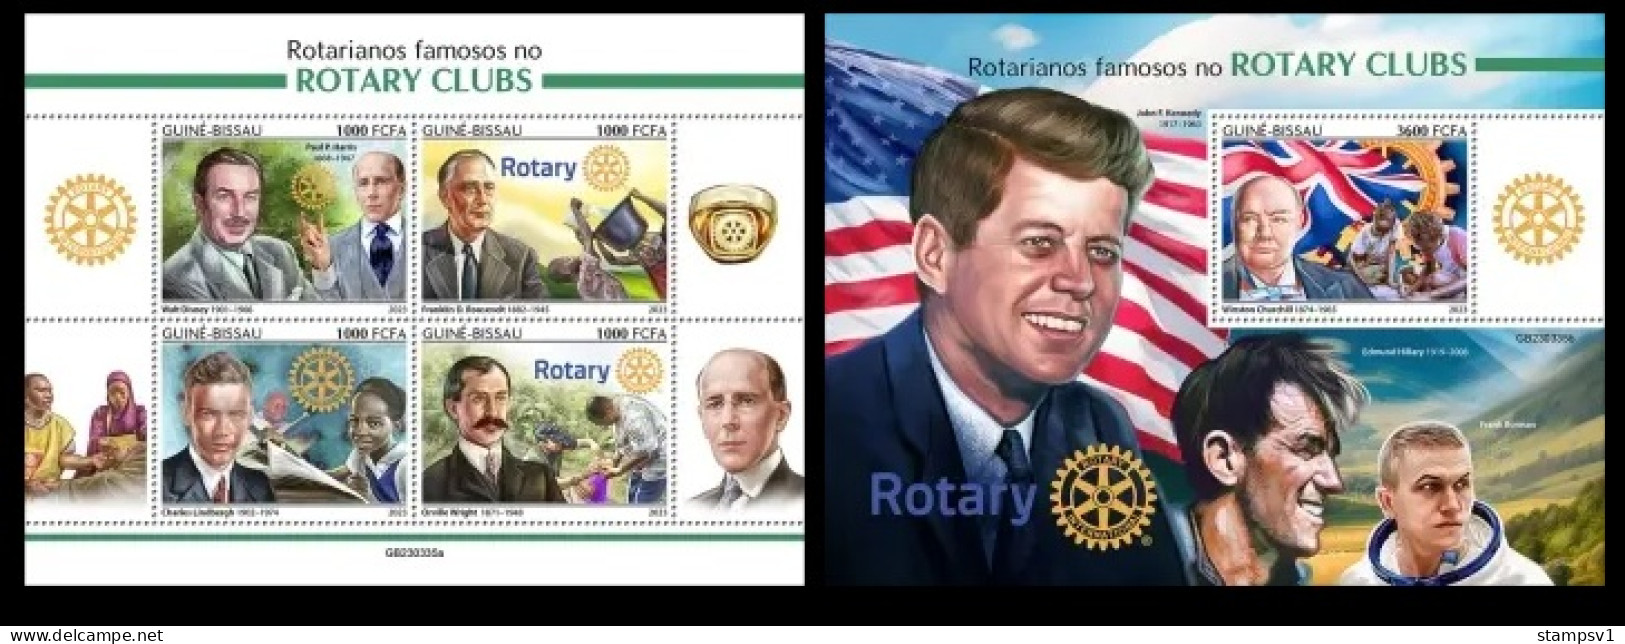 Guinea Bissau  2023 Famous Rotarians. (335) OFFICIAL ISSUE - Rotary, Lions Club